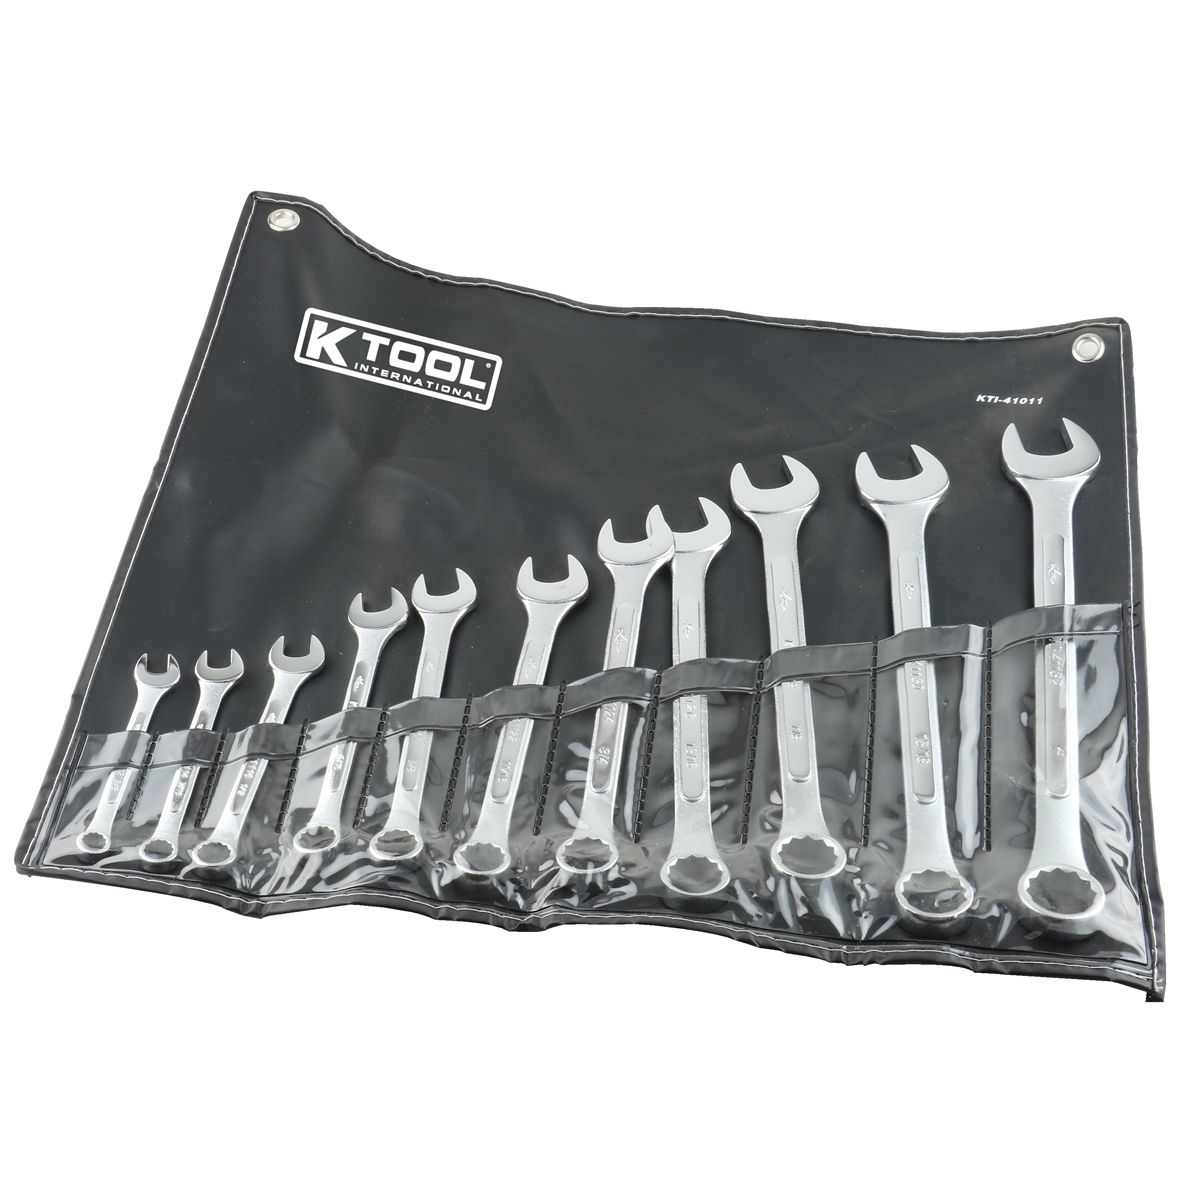 Combination Wrench Set SAE w/ Kit Bag - 11 Piece